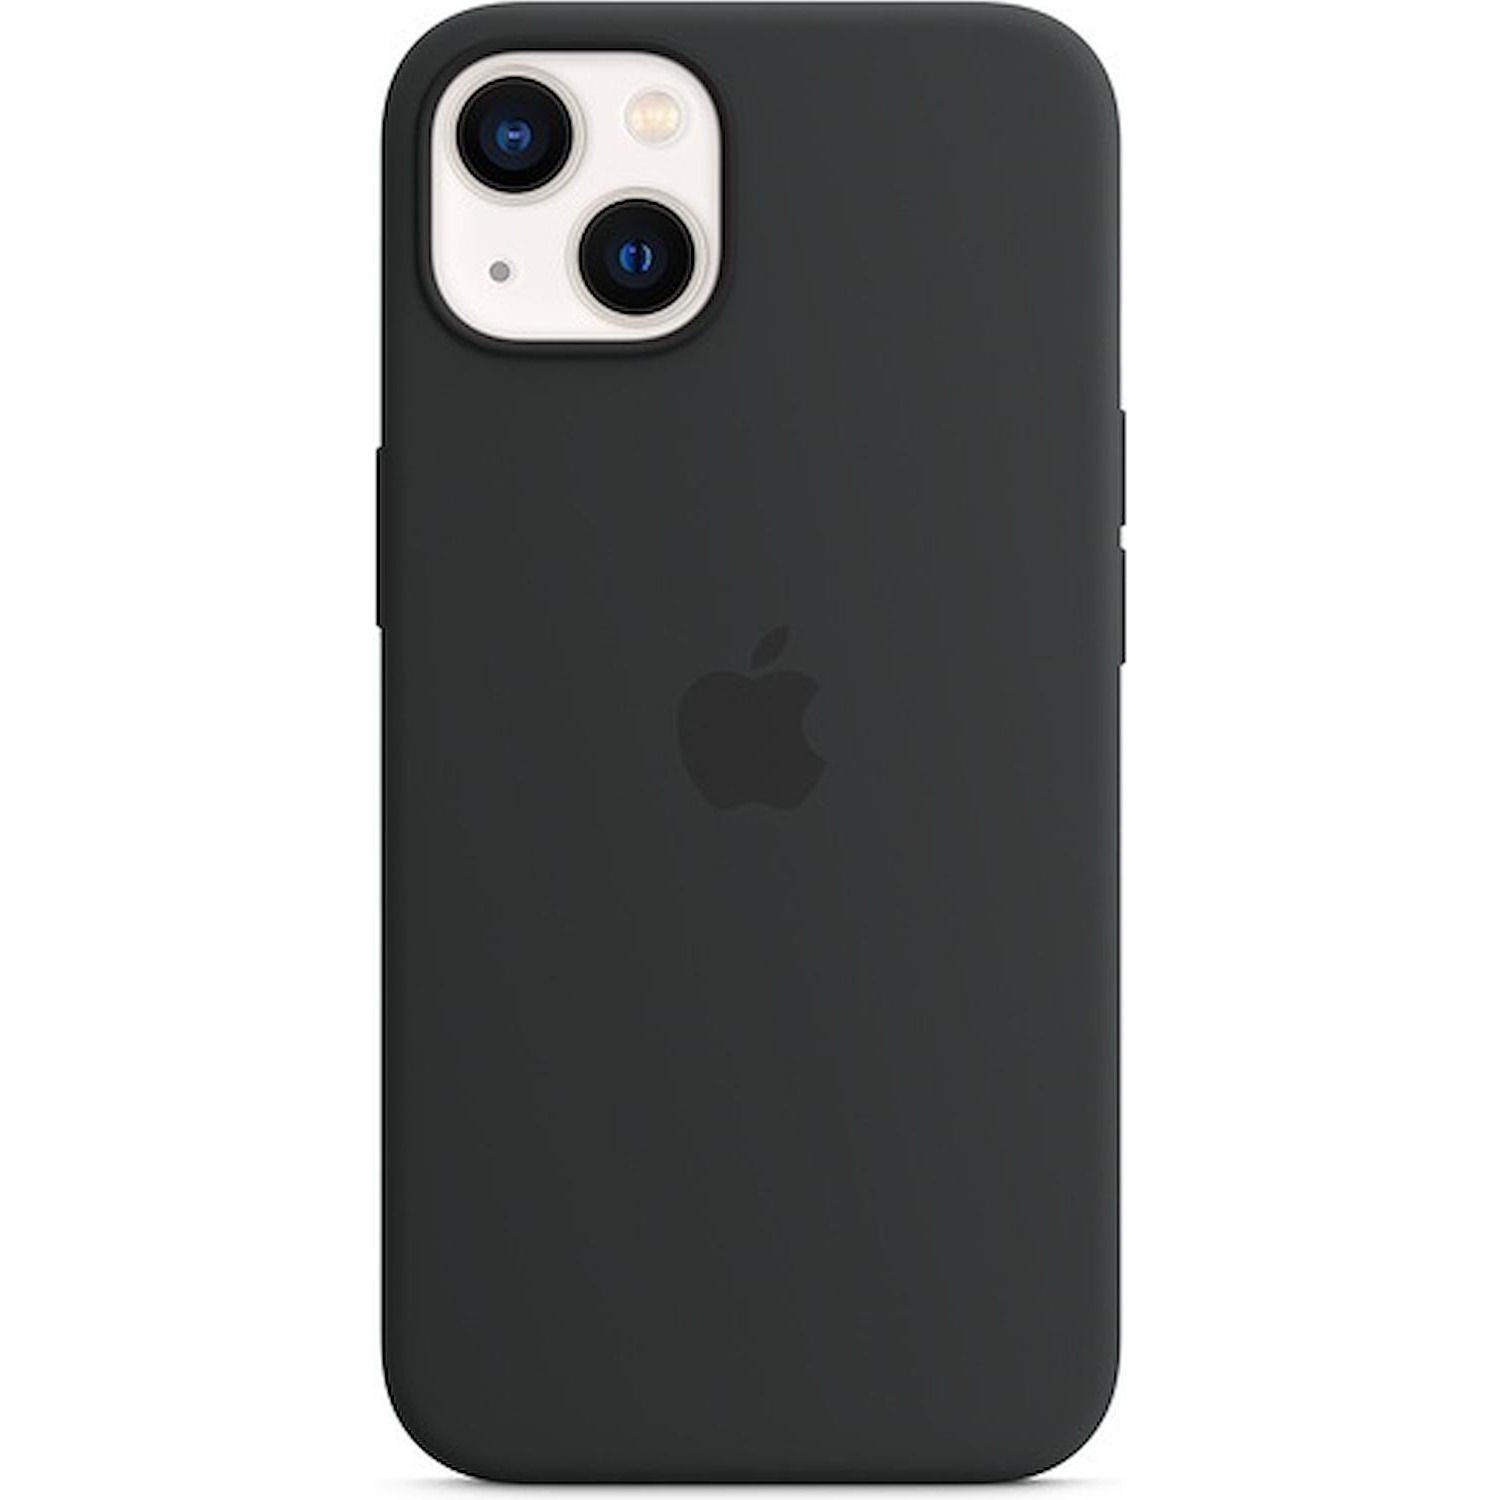 https://images.dimostore.it/1500/cover-apple-per-iphone-13-in-silicone-nero-at6appmm2a3zma.jpg